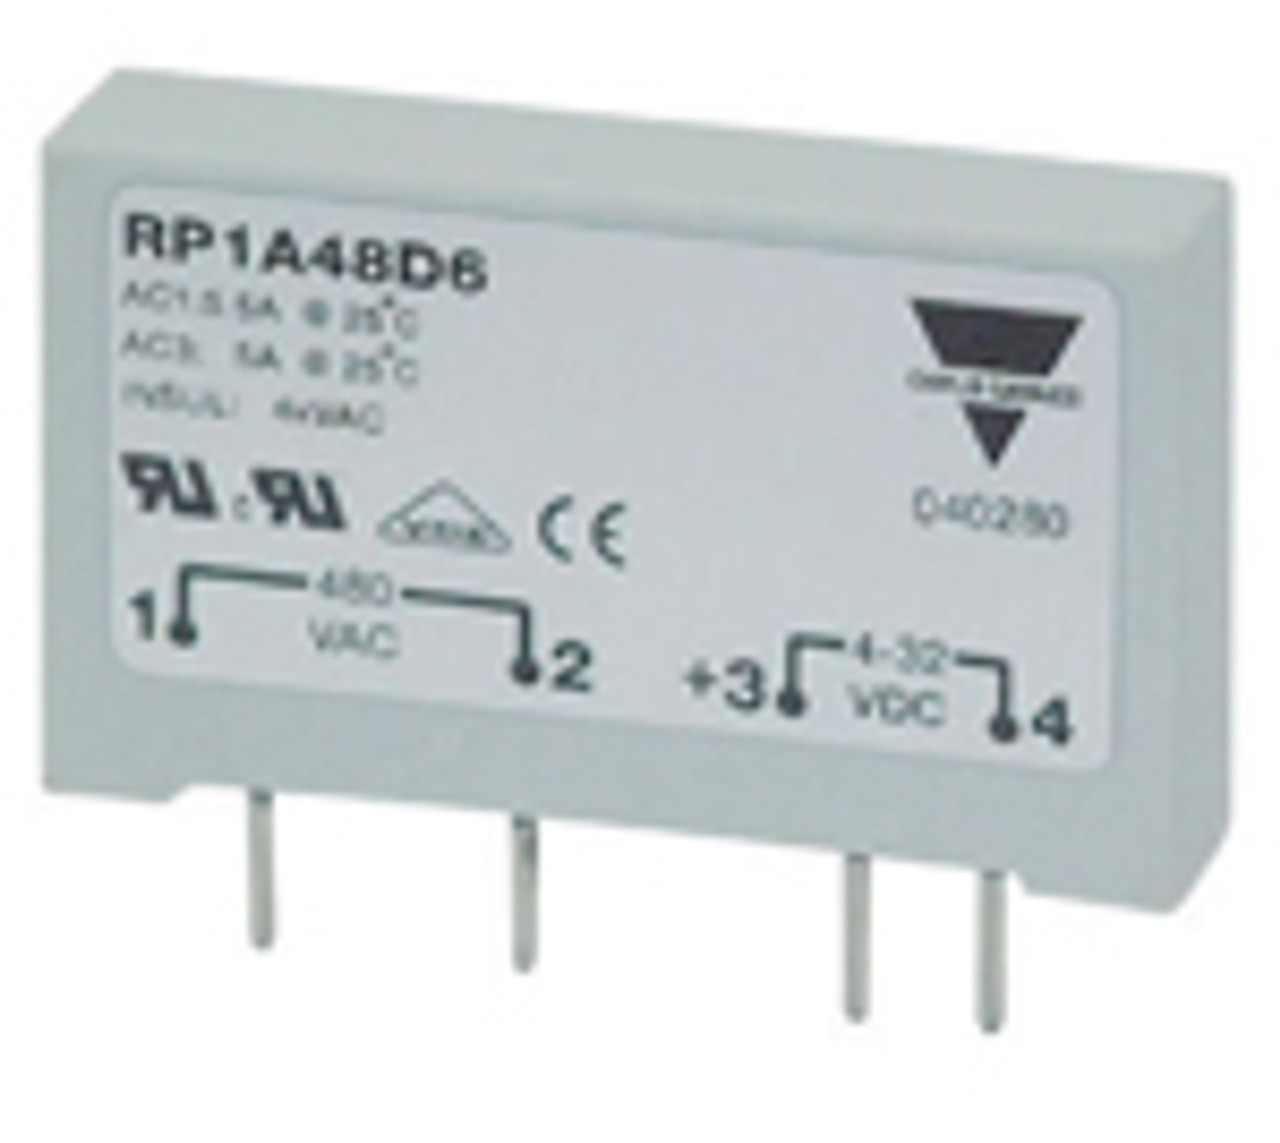 Carlo Gavazzi RP1B48D6 Solid State Relays